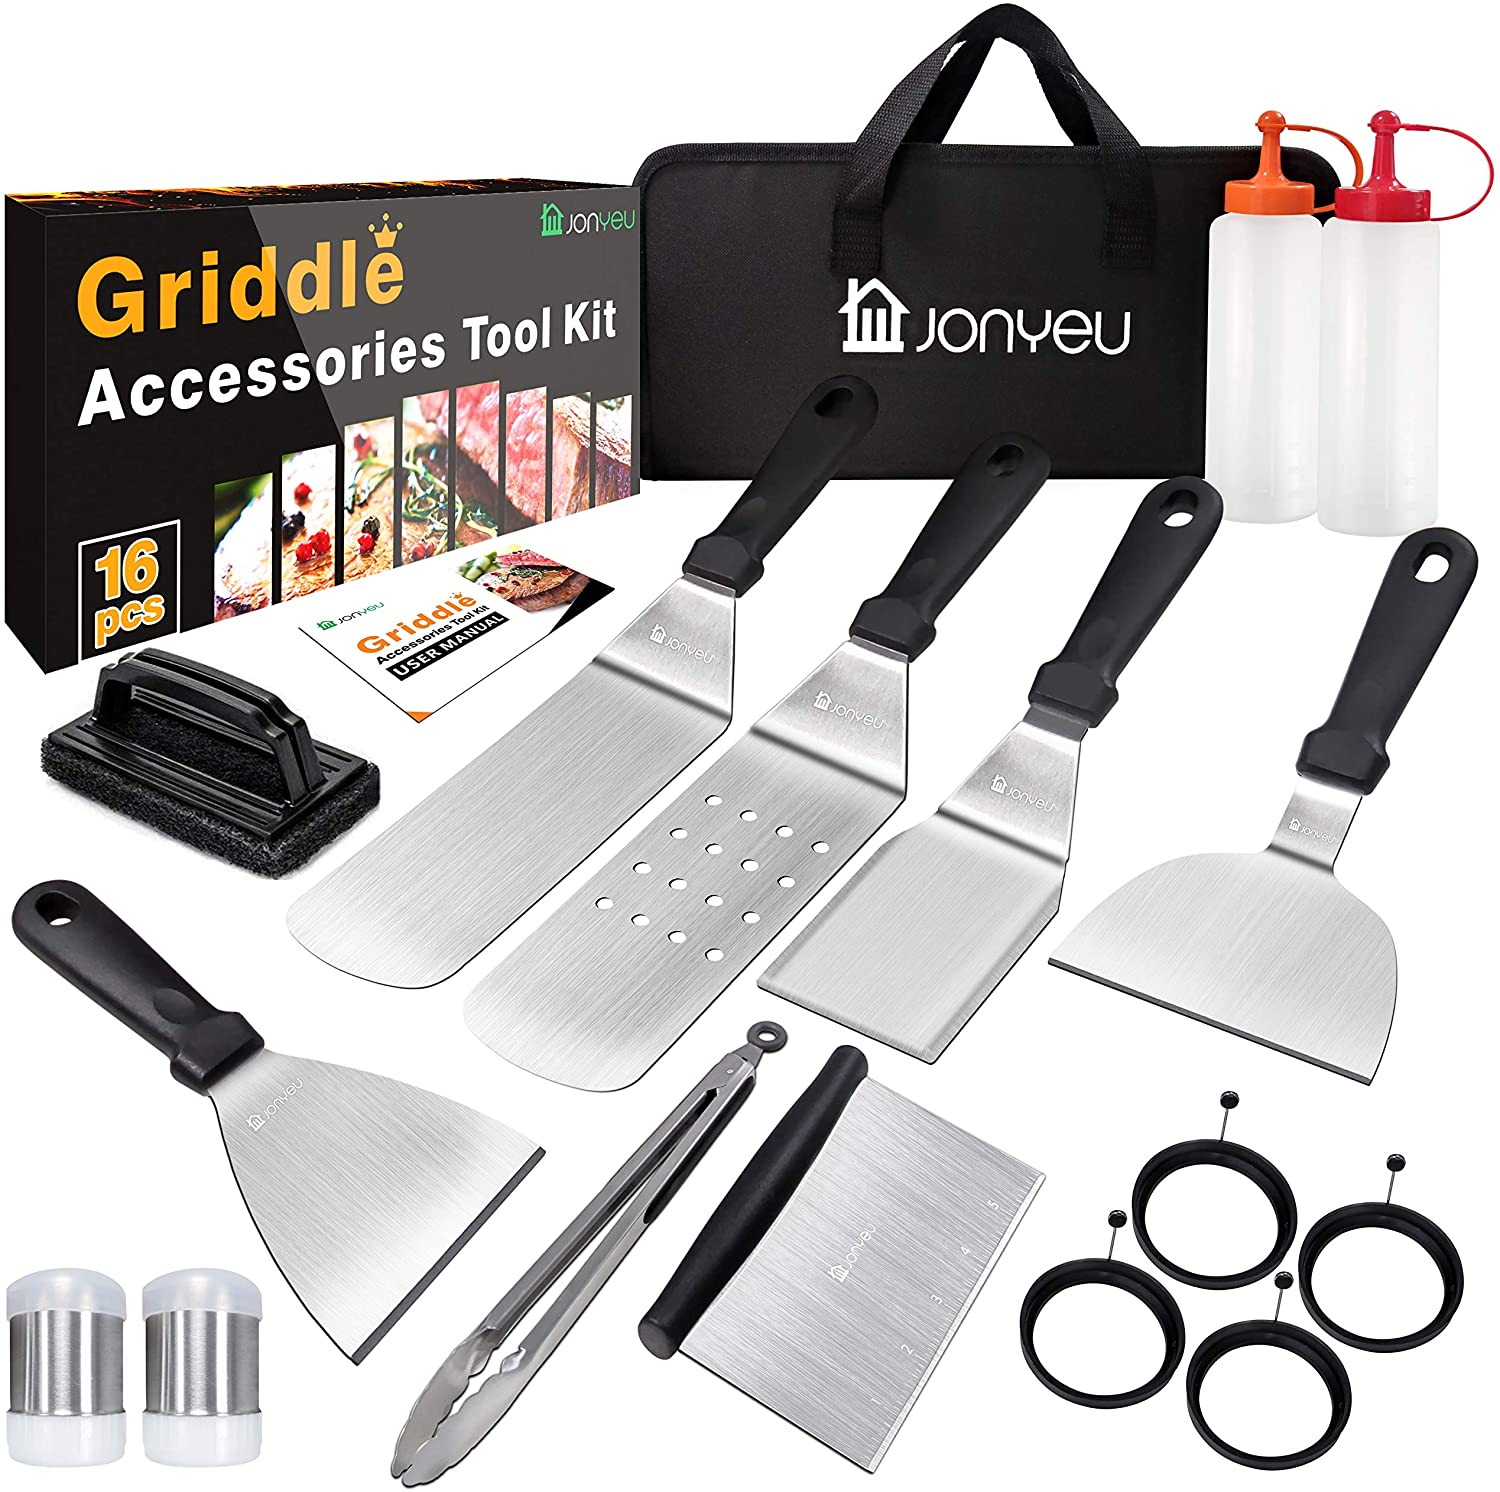 Muzzai- Stainless Steel Teppanyaki Blackstone Accessories /& BBQ Tools Set Blackstone Griddle Accessories,13 Pieces Flat Top Grill Accessories,for Outdoor Camping Griddle Accessories Kit